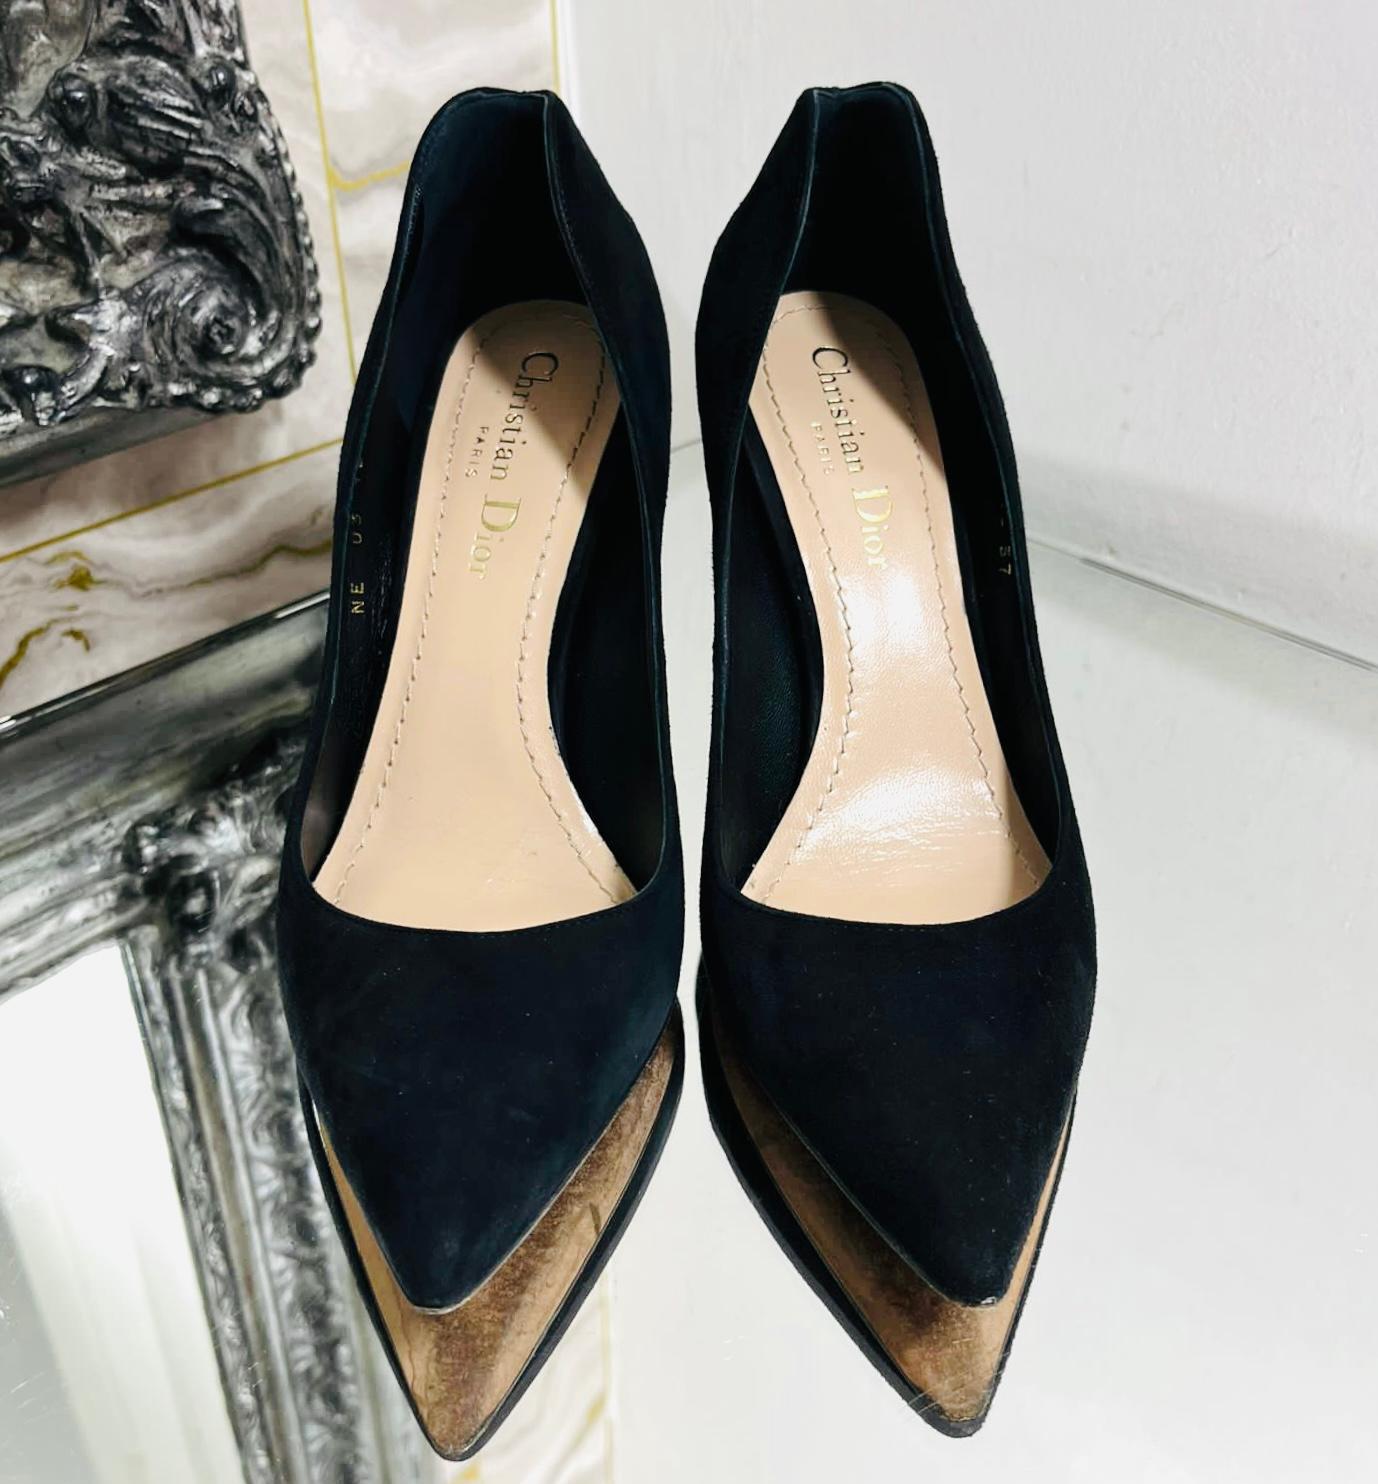 Christian Dior Stud Embellished Suede Pumps

Black 'Dioramour' heels detailed with gold, studded heart design to the heel.

Designed with pointed toes and sharp-cut toplines.

Featuring leather lining and soles.

Size – 37

Condition – Very